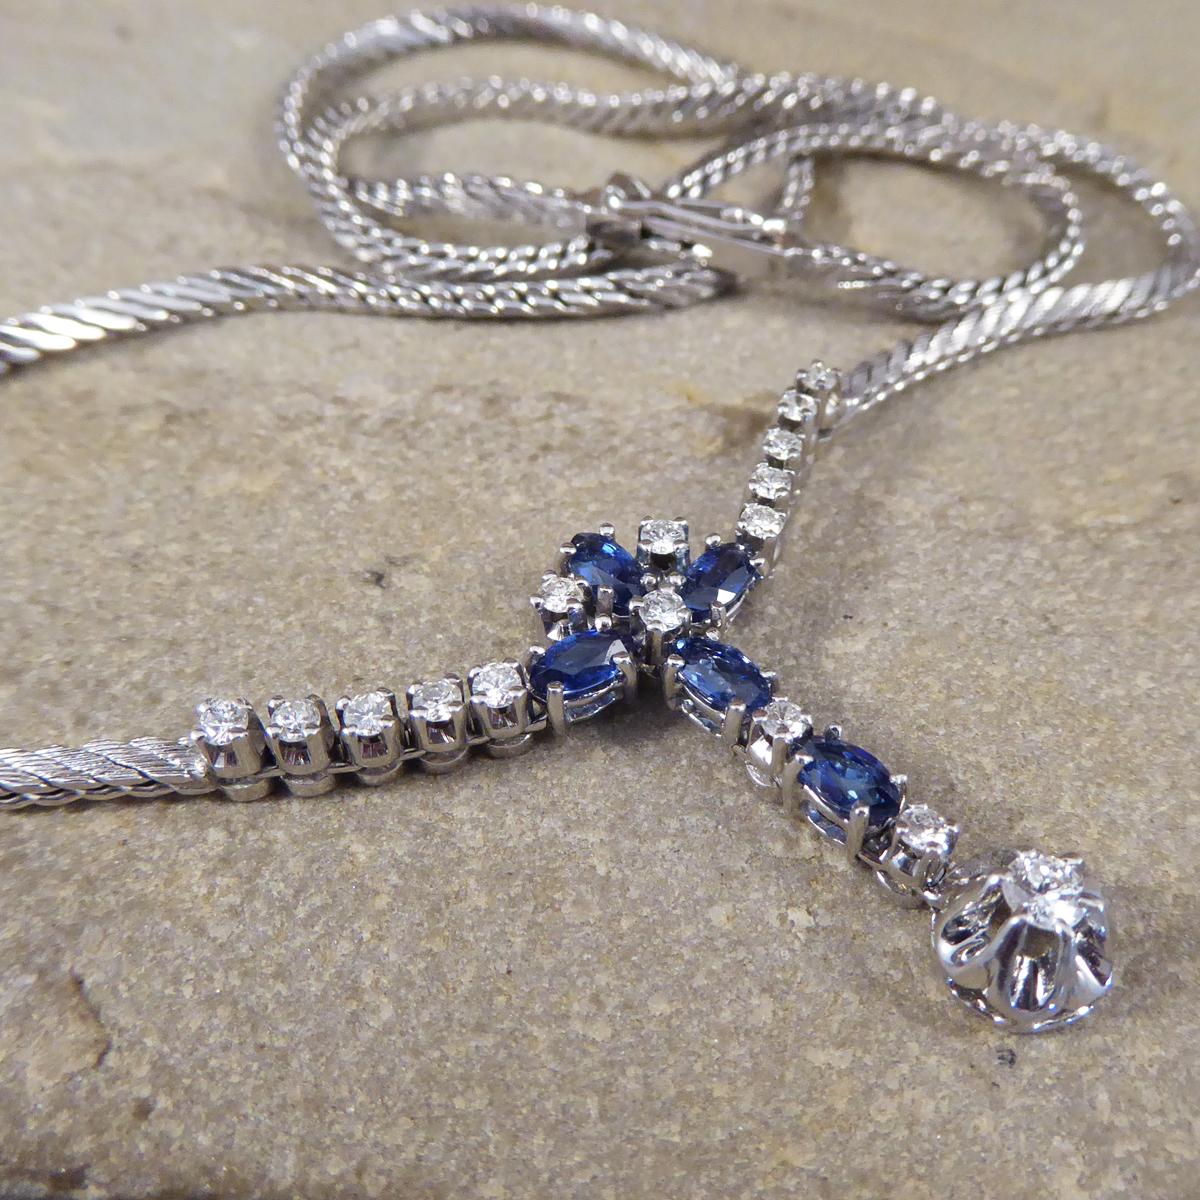 This lovely contemporary necklace with a unique thicker double set S link chain in 14ct White Gold. The necklace features a Sapphire and Diamond cross shaped drop. A detailed and decorative necklace that sits beautifully on the neckline.

Sapphire